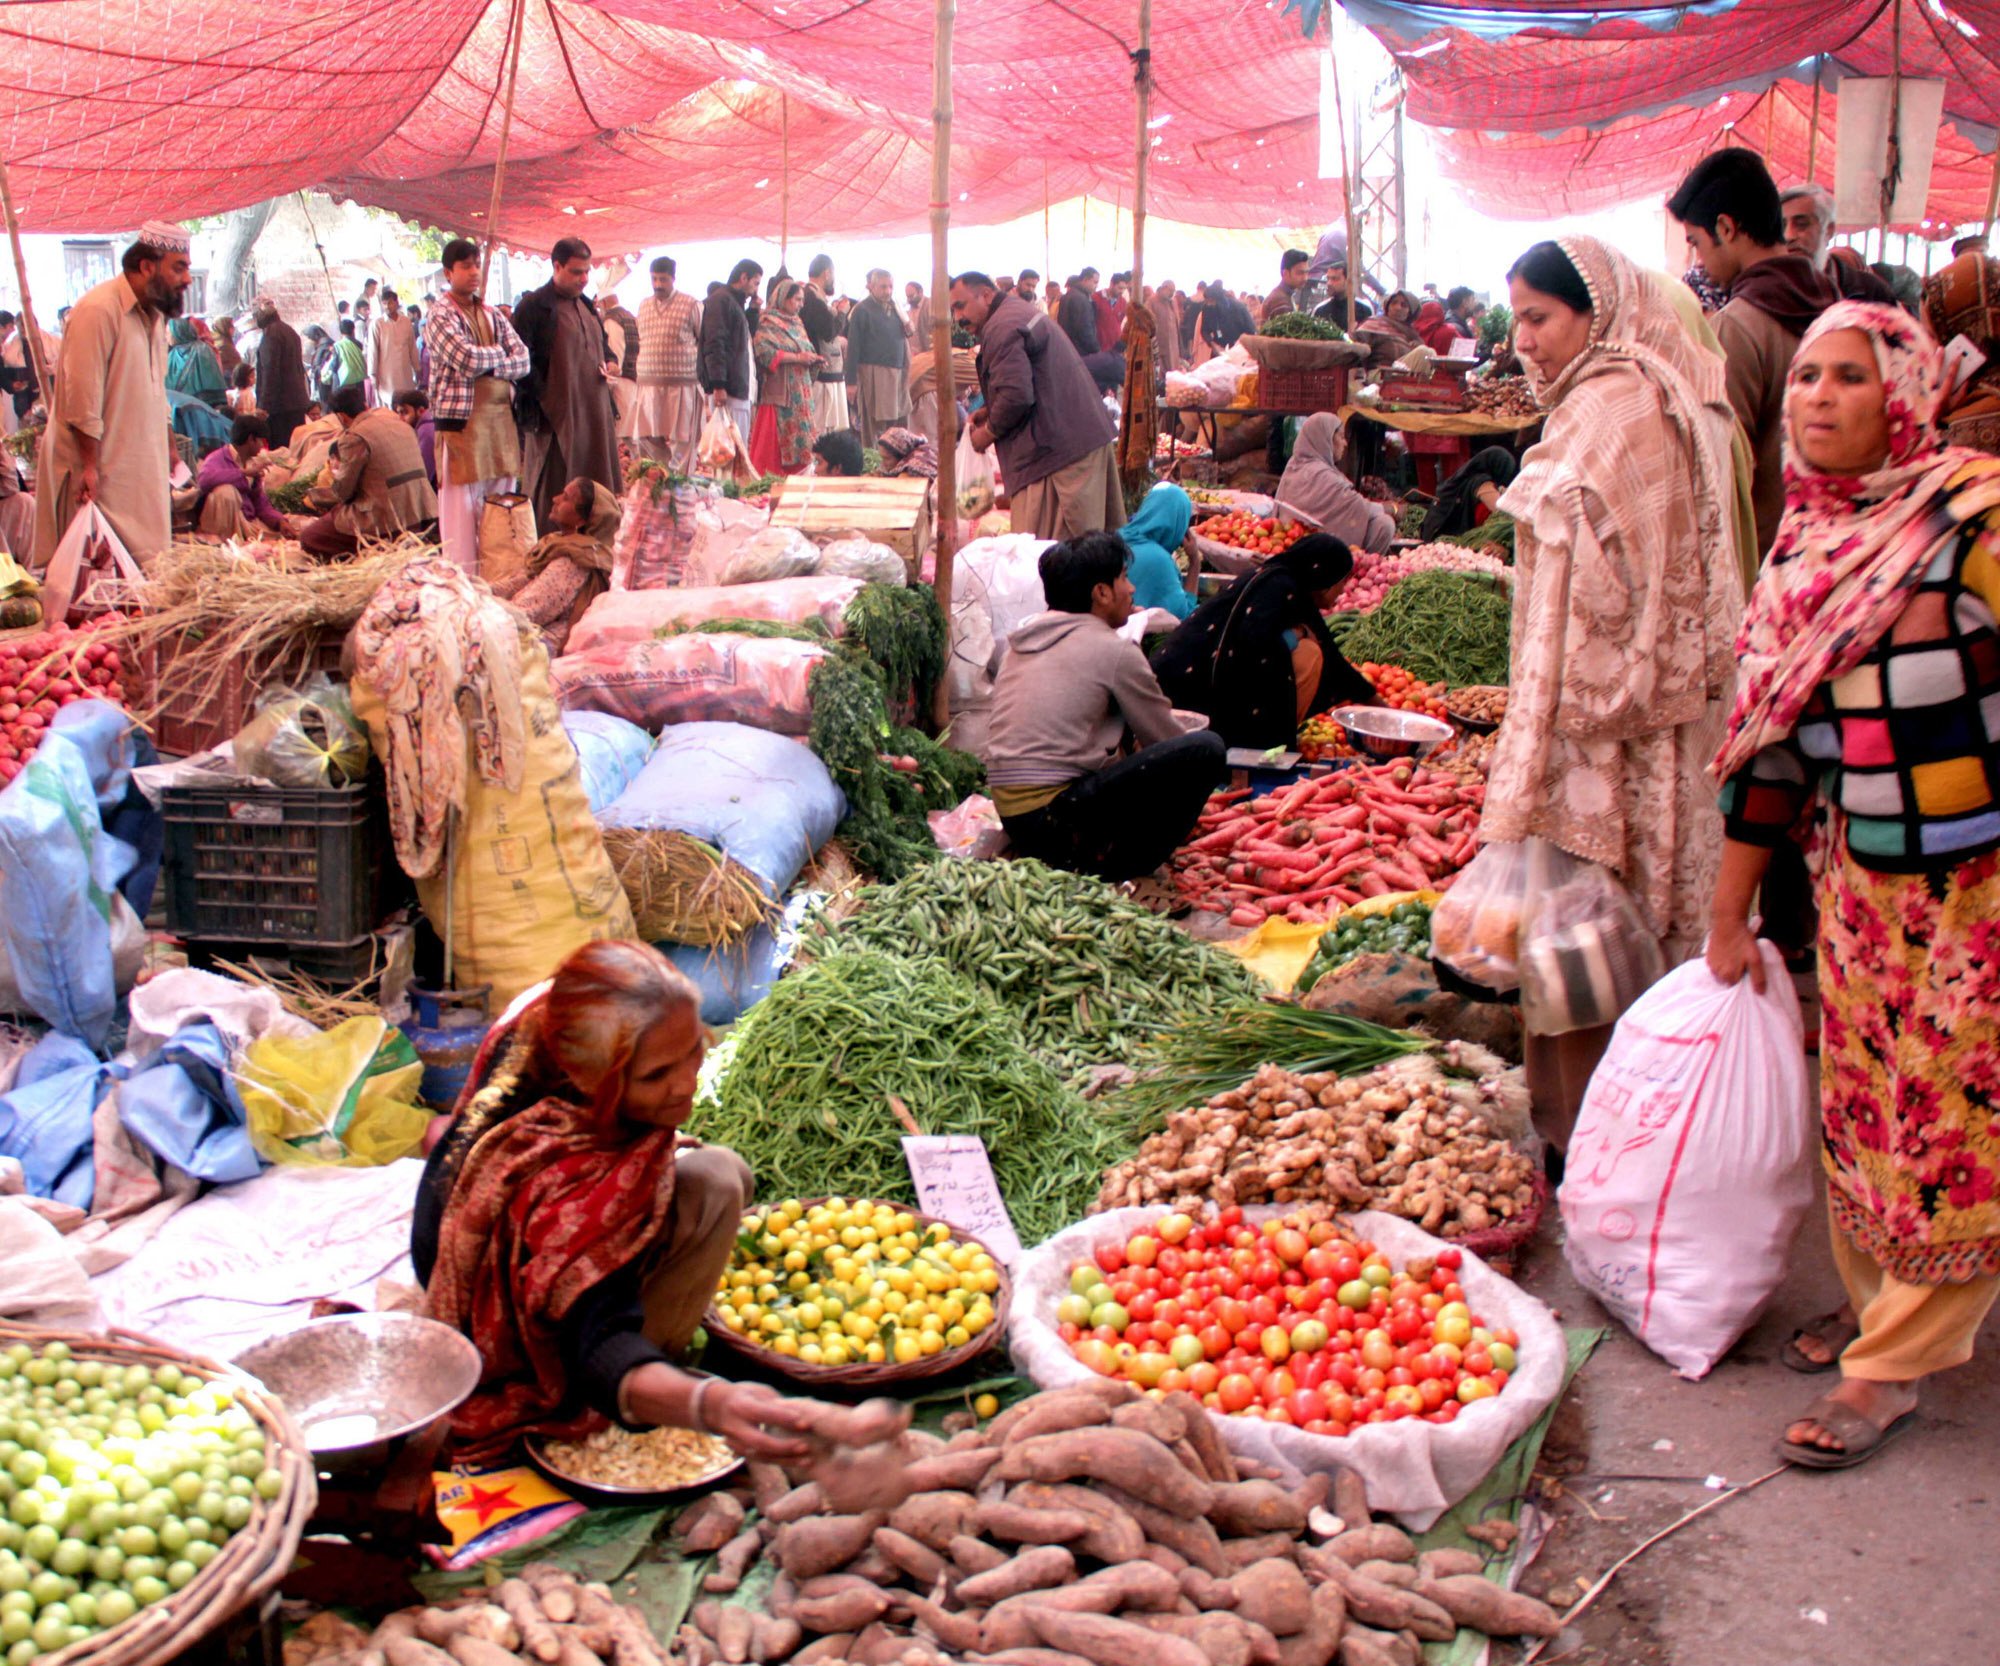 Sunday Bazaar: Customers complain about inflated prices